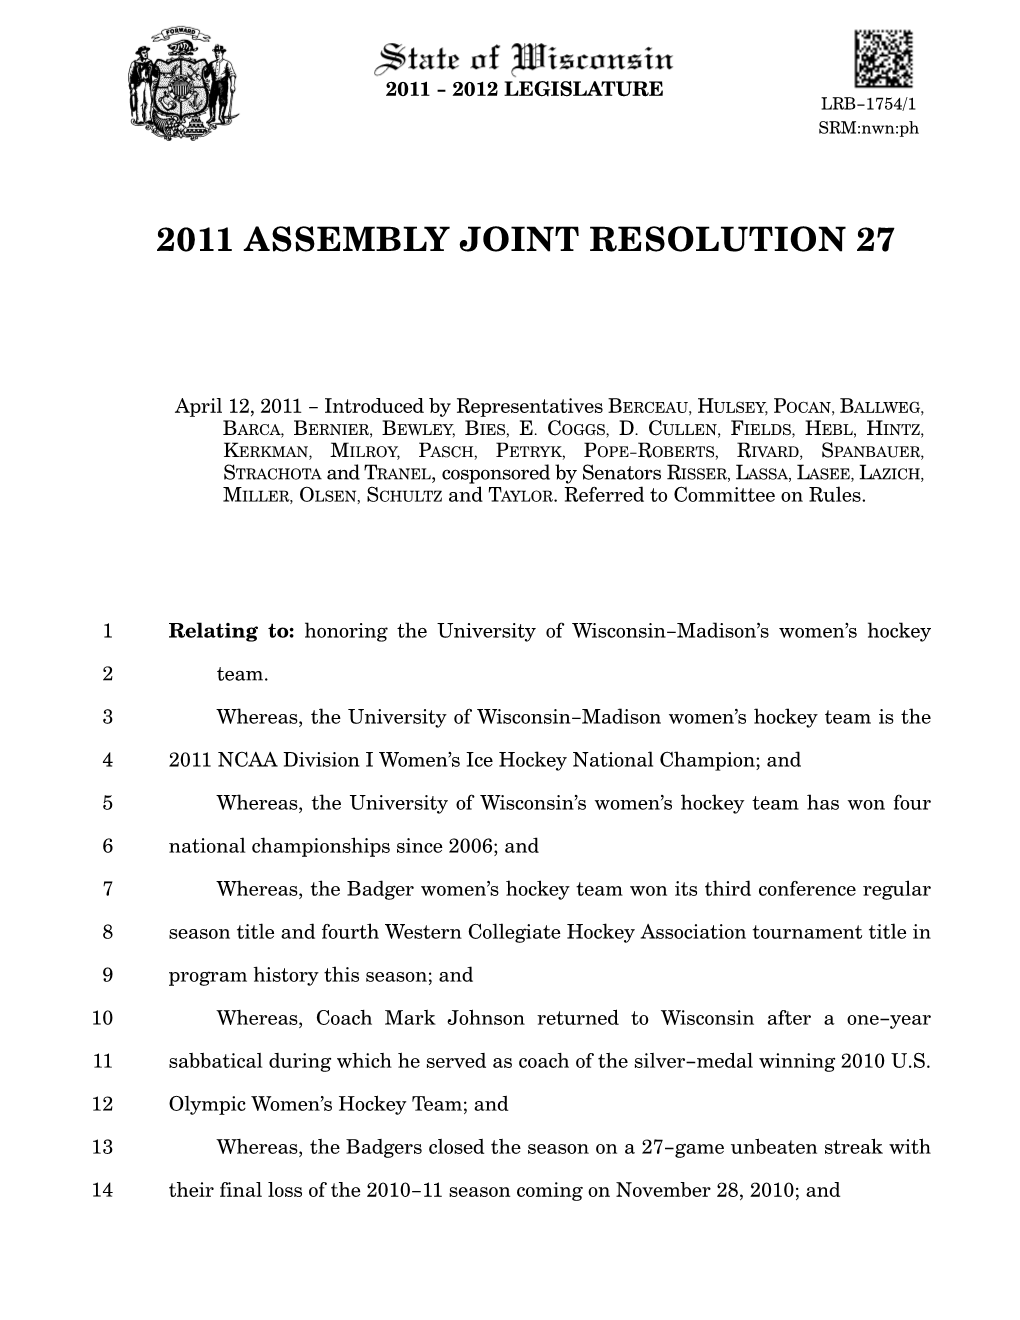 2011 Assembly Joint Resolution 27